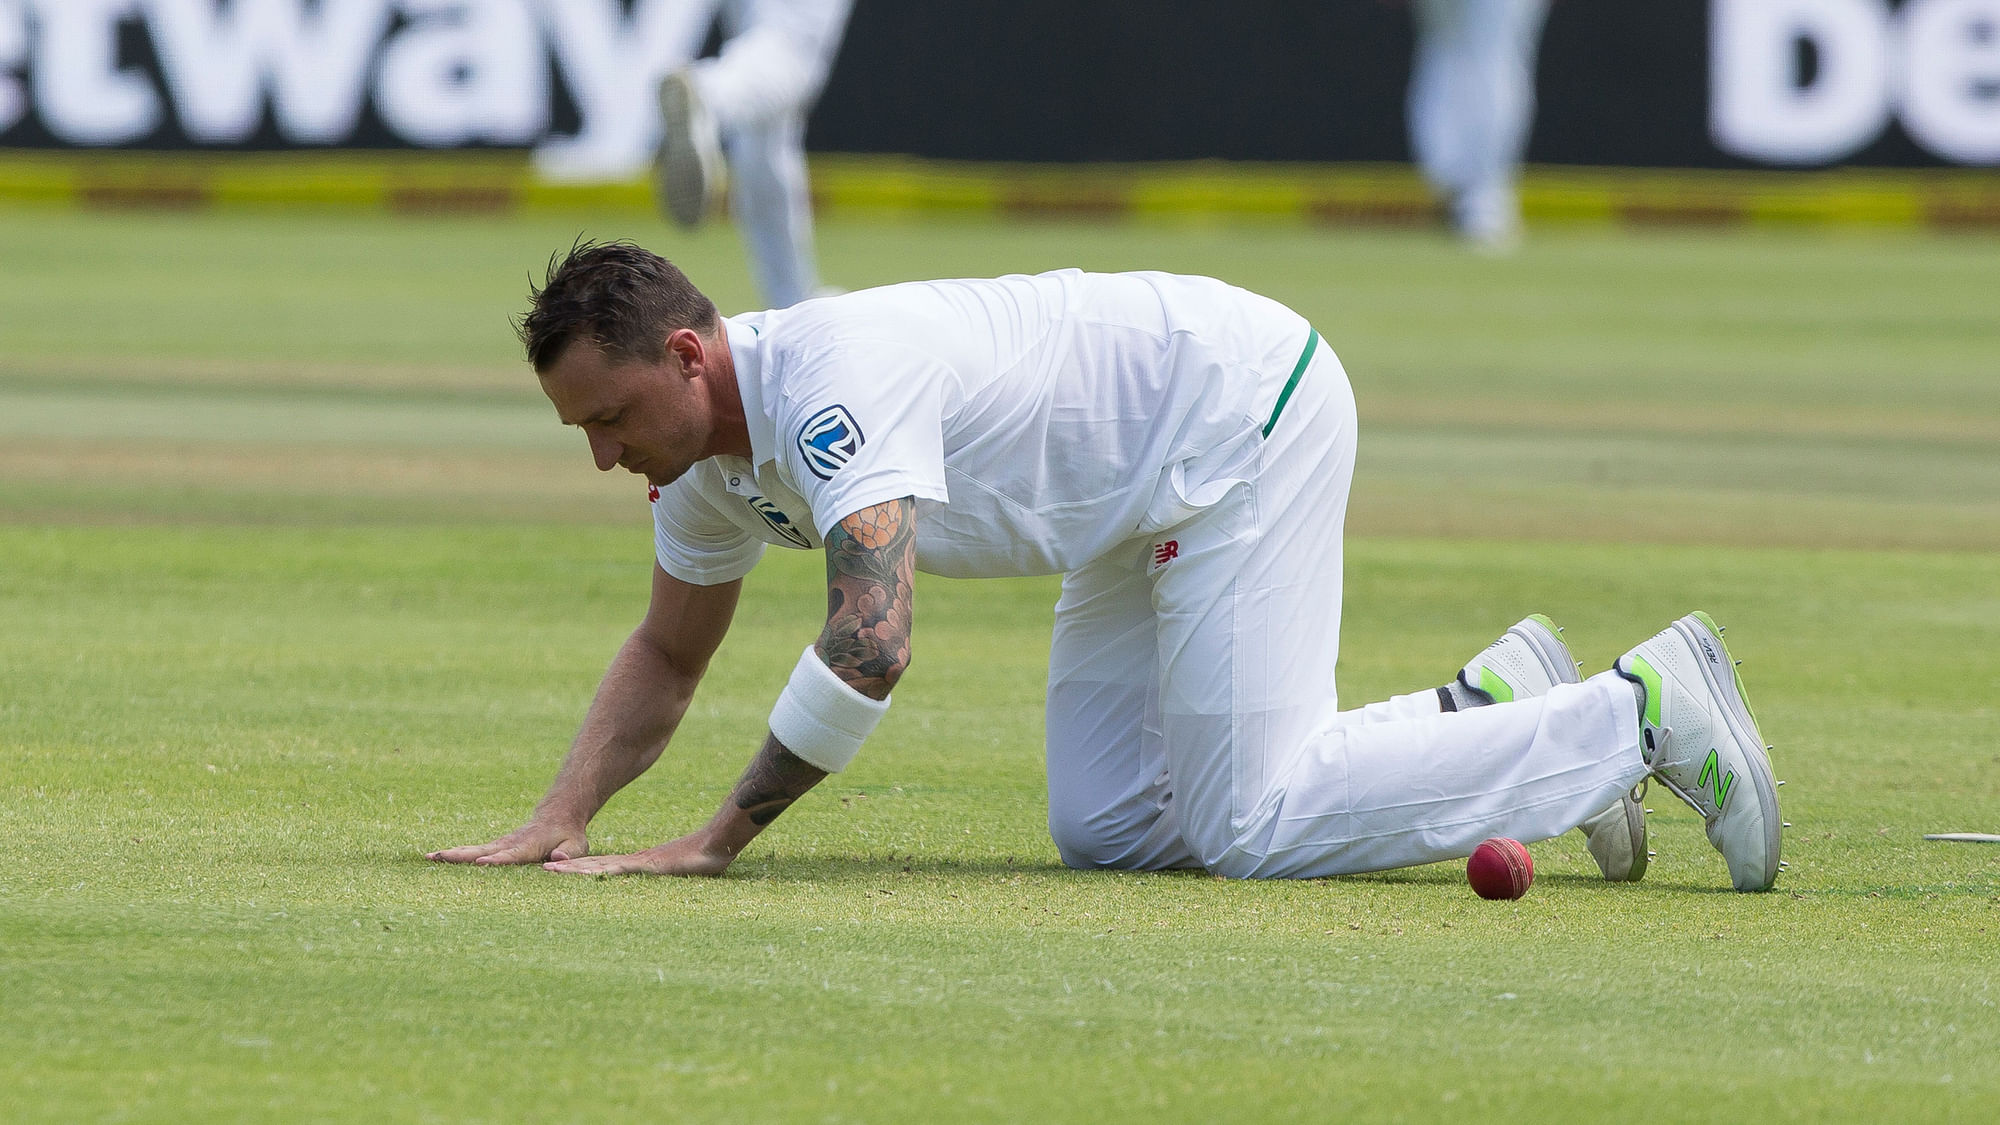 Dale Steyn got injured during the Cape Town test against India.